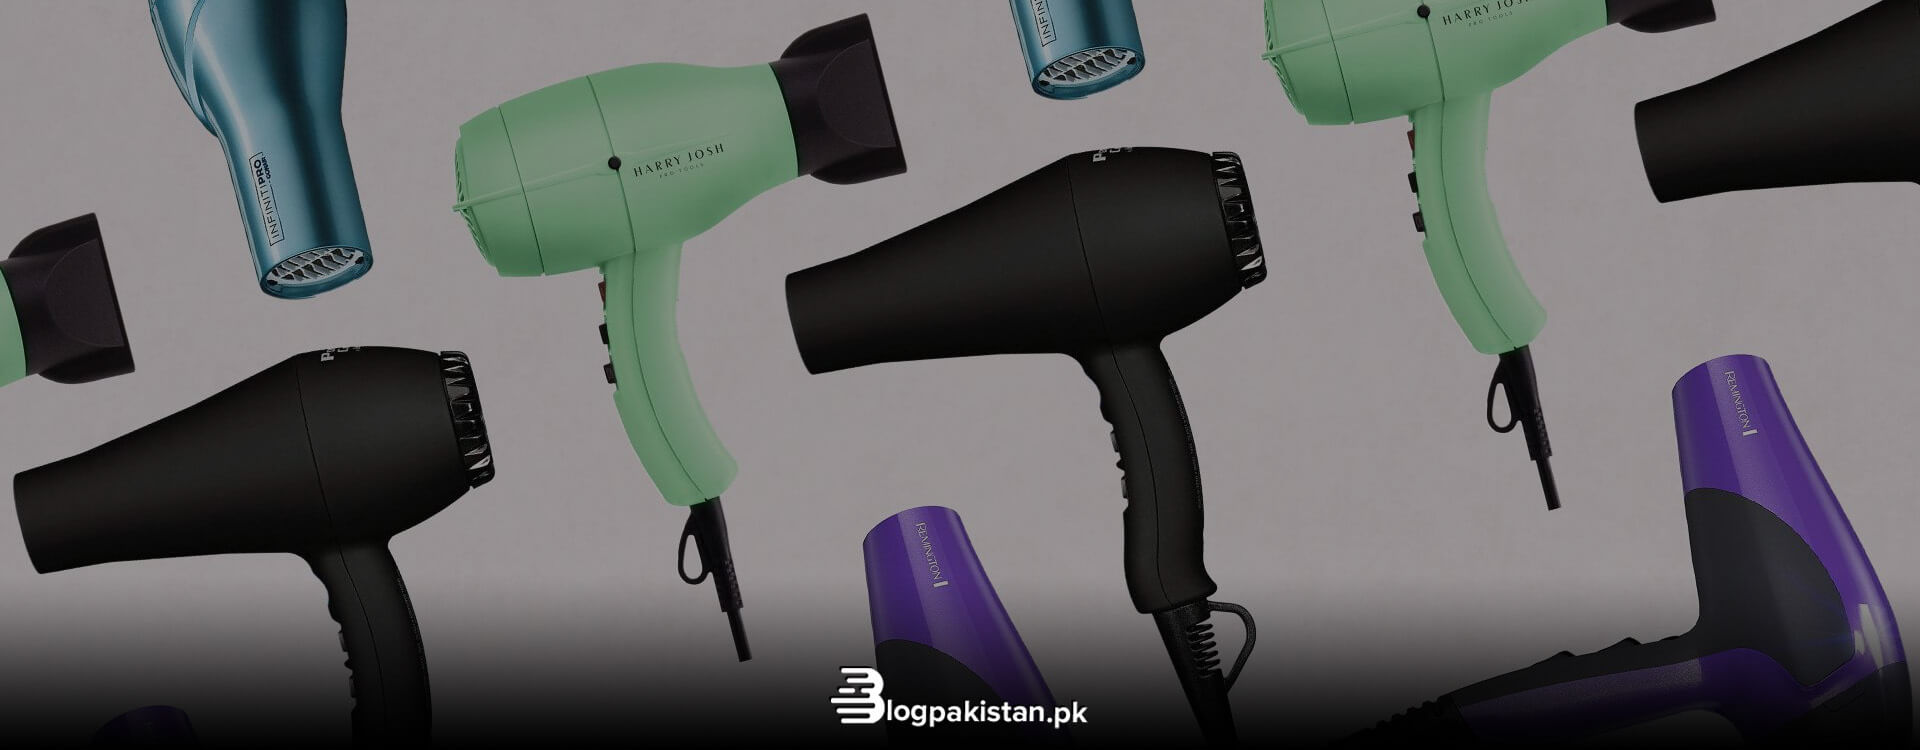 Price & Specs of 11 Hair Dryers by Top Brands in Pakistan